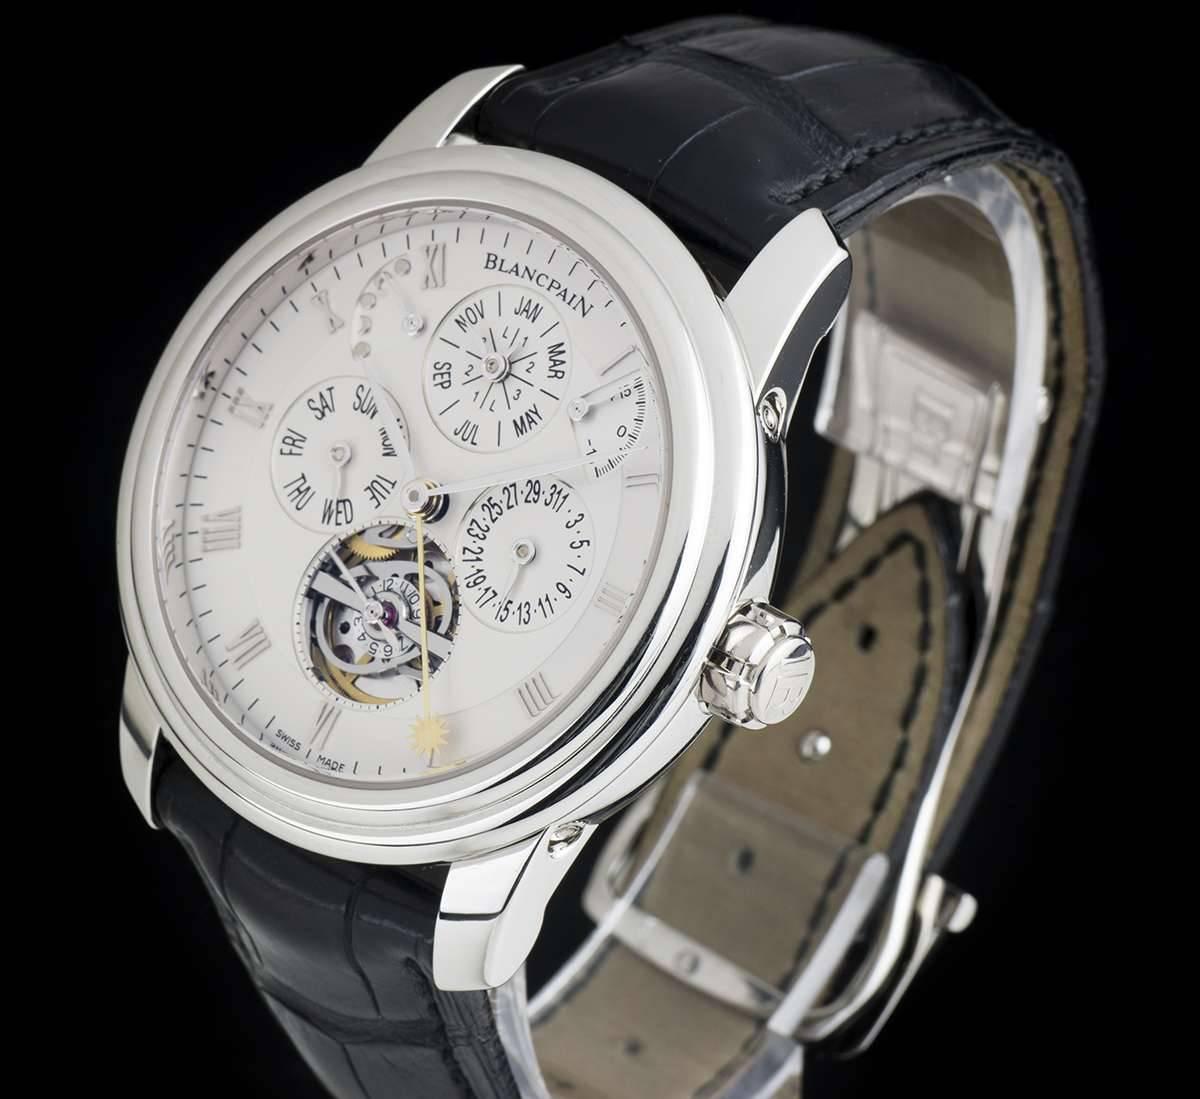 A Platinum Marching Equation Of Time Perpetual Calendar Villeret Limited Edition Gents Wristwatch, opaline silver dial with applied roman numerals, retrograde plus/minus minutes equation of time indicator between 1 & 2 0'clock, date sub-dial at